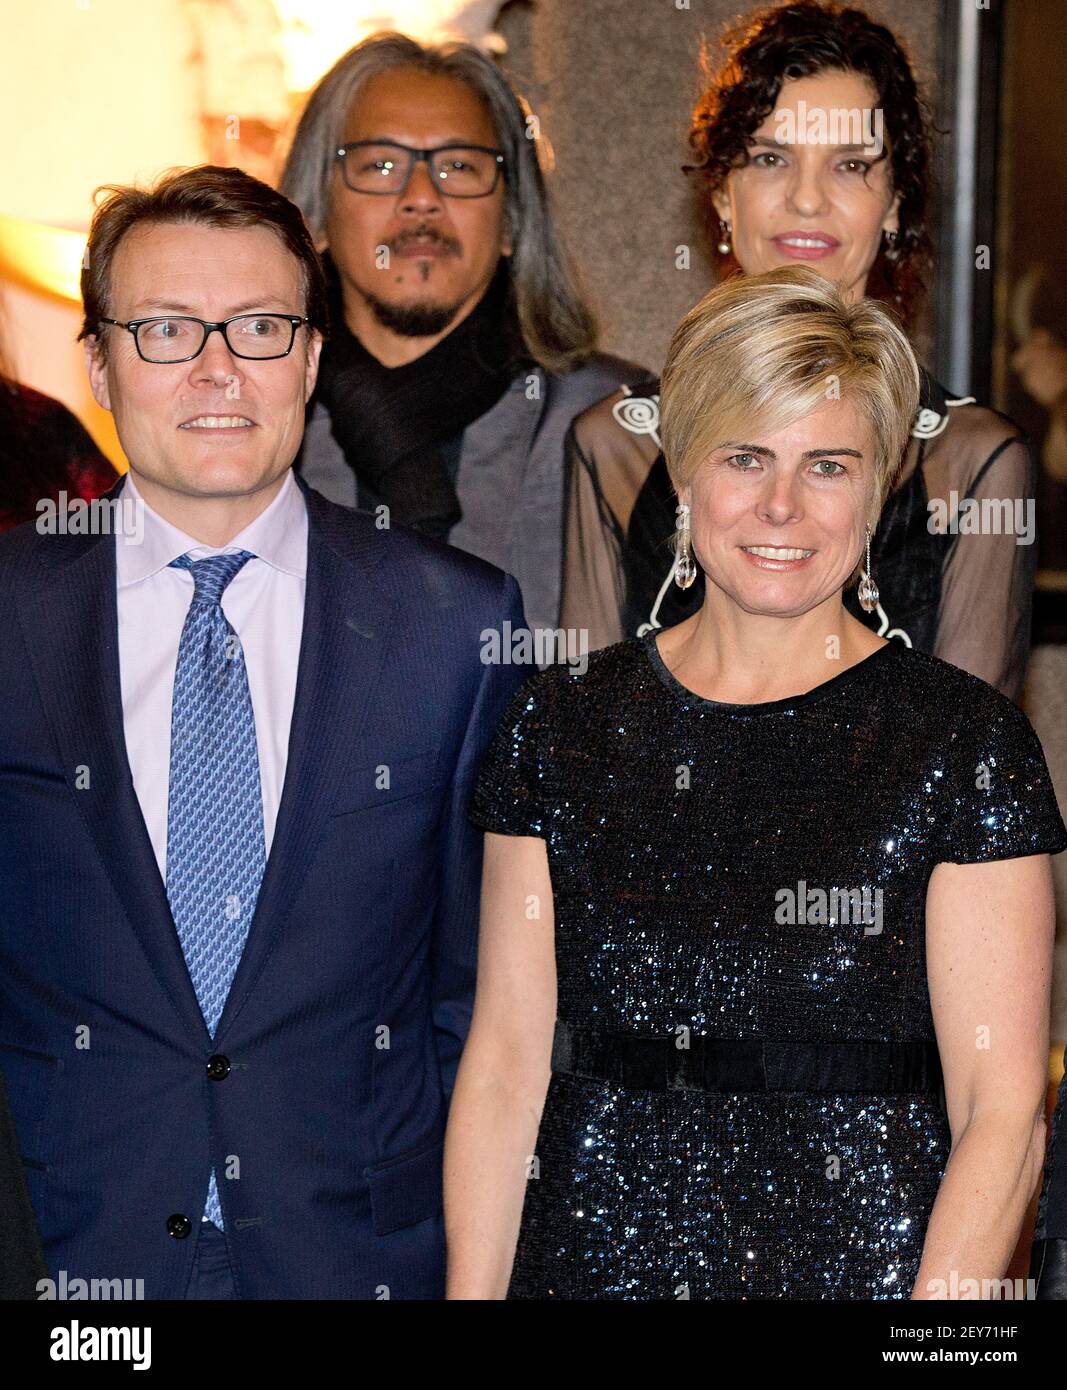 10-12-2014 AMSTERDAM - Prince Constantijn and Princess Laurentien attend the award ceremony of the Prince Claus Prize 2014 to Columbian artist and plant expert Abel RodrÃguez at the Royal Palace in Amsterdam (Photo by Robin Utrecht/Sipa USA) Stock Photo